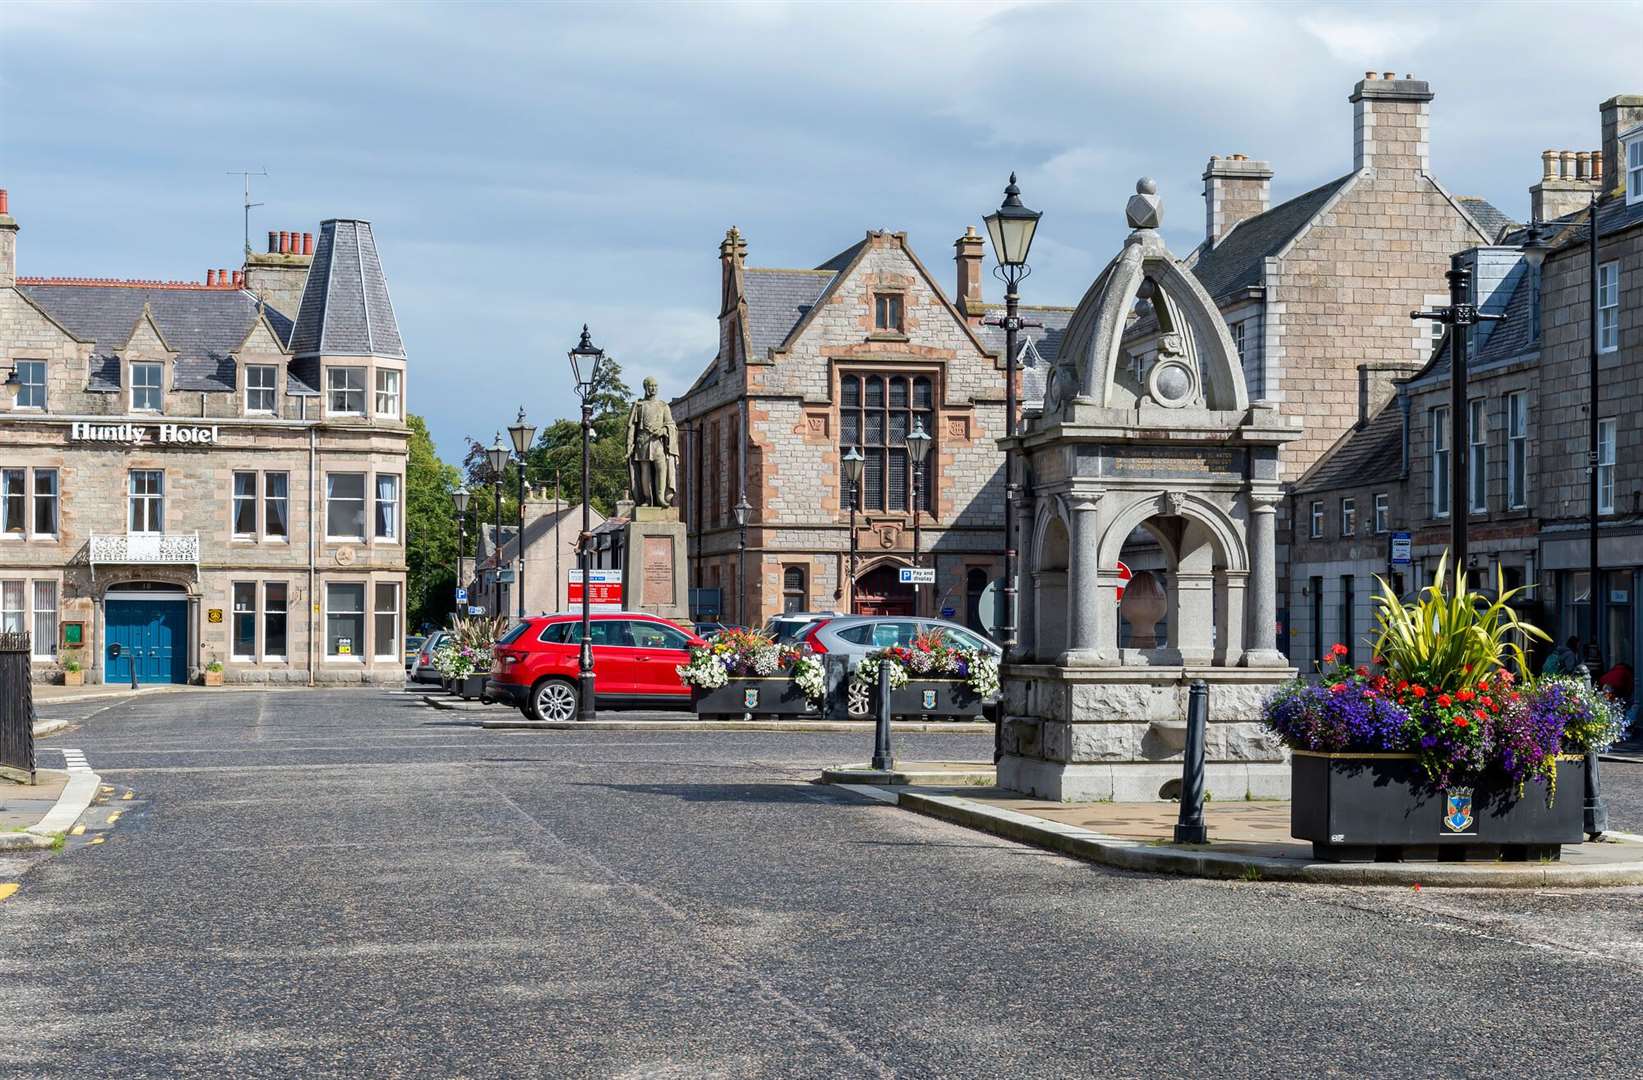 The lamps in Huntly town square are set to be removed over safety concerns